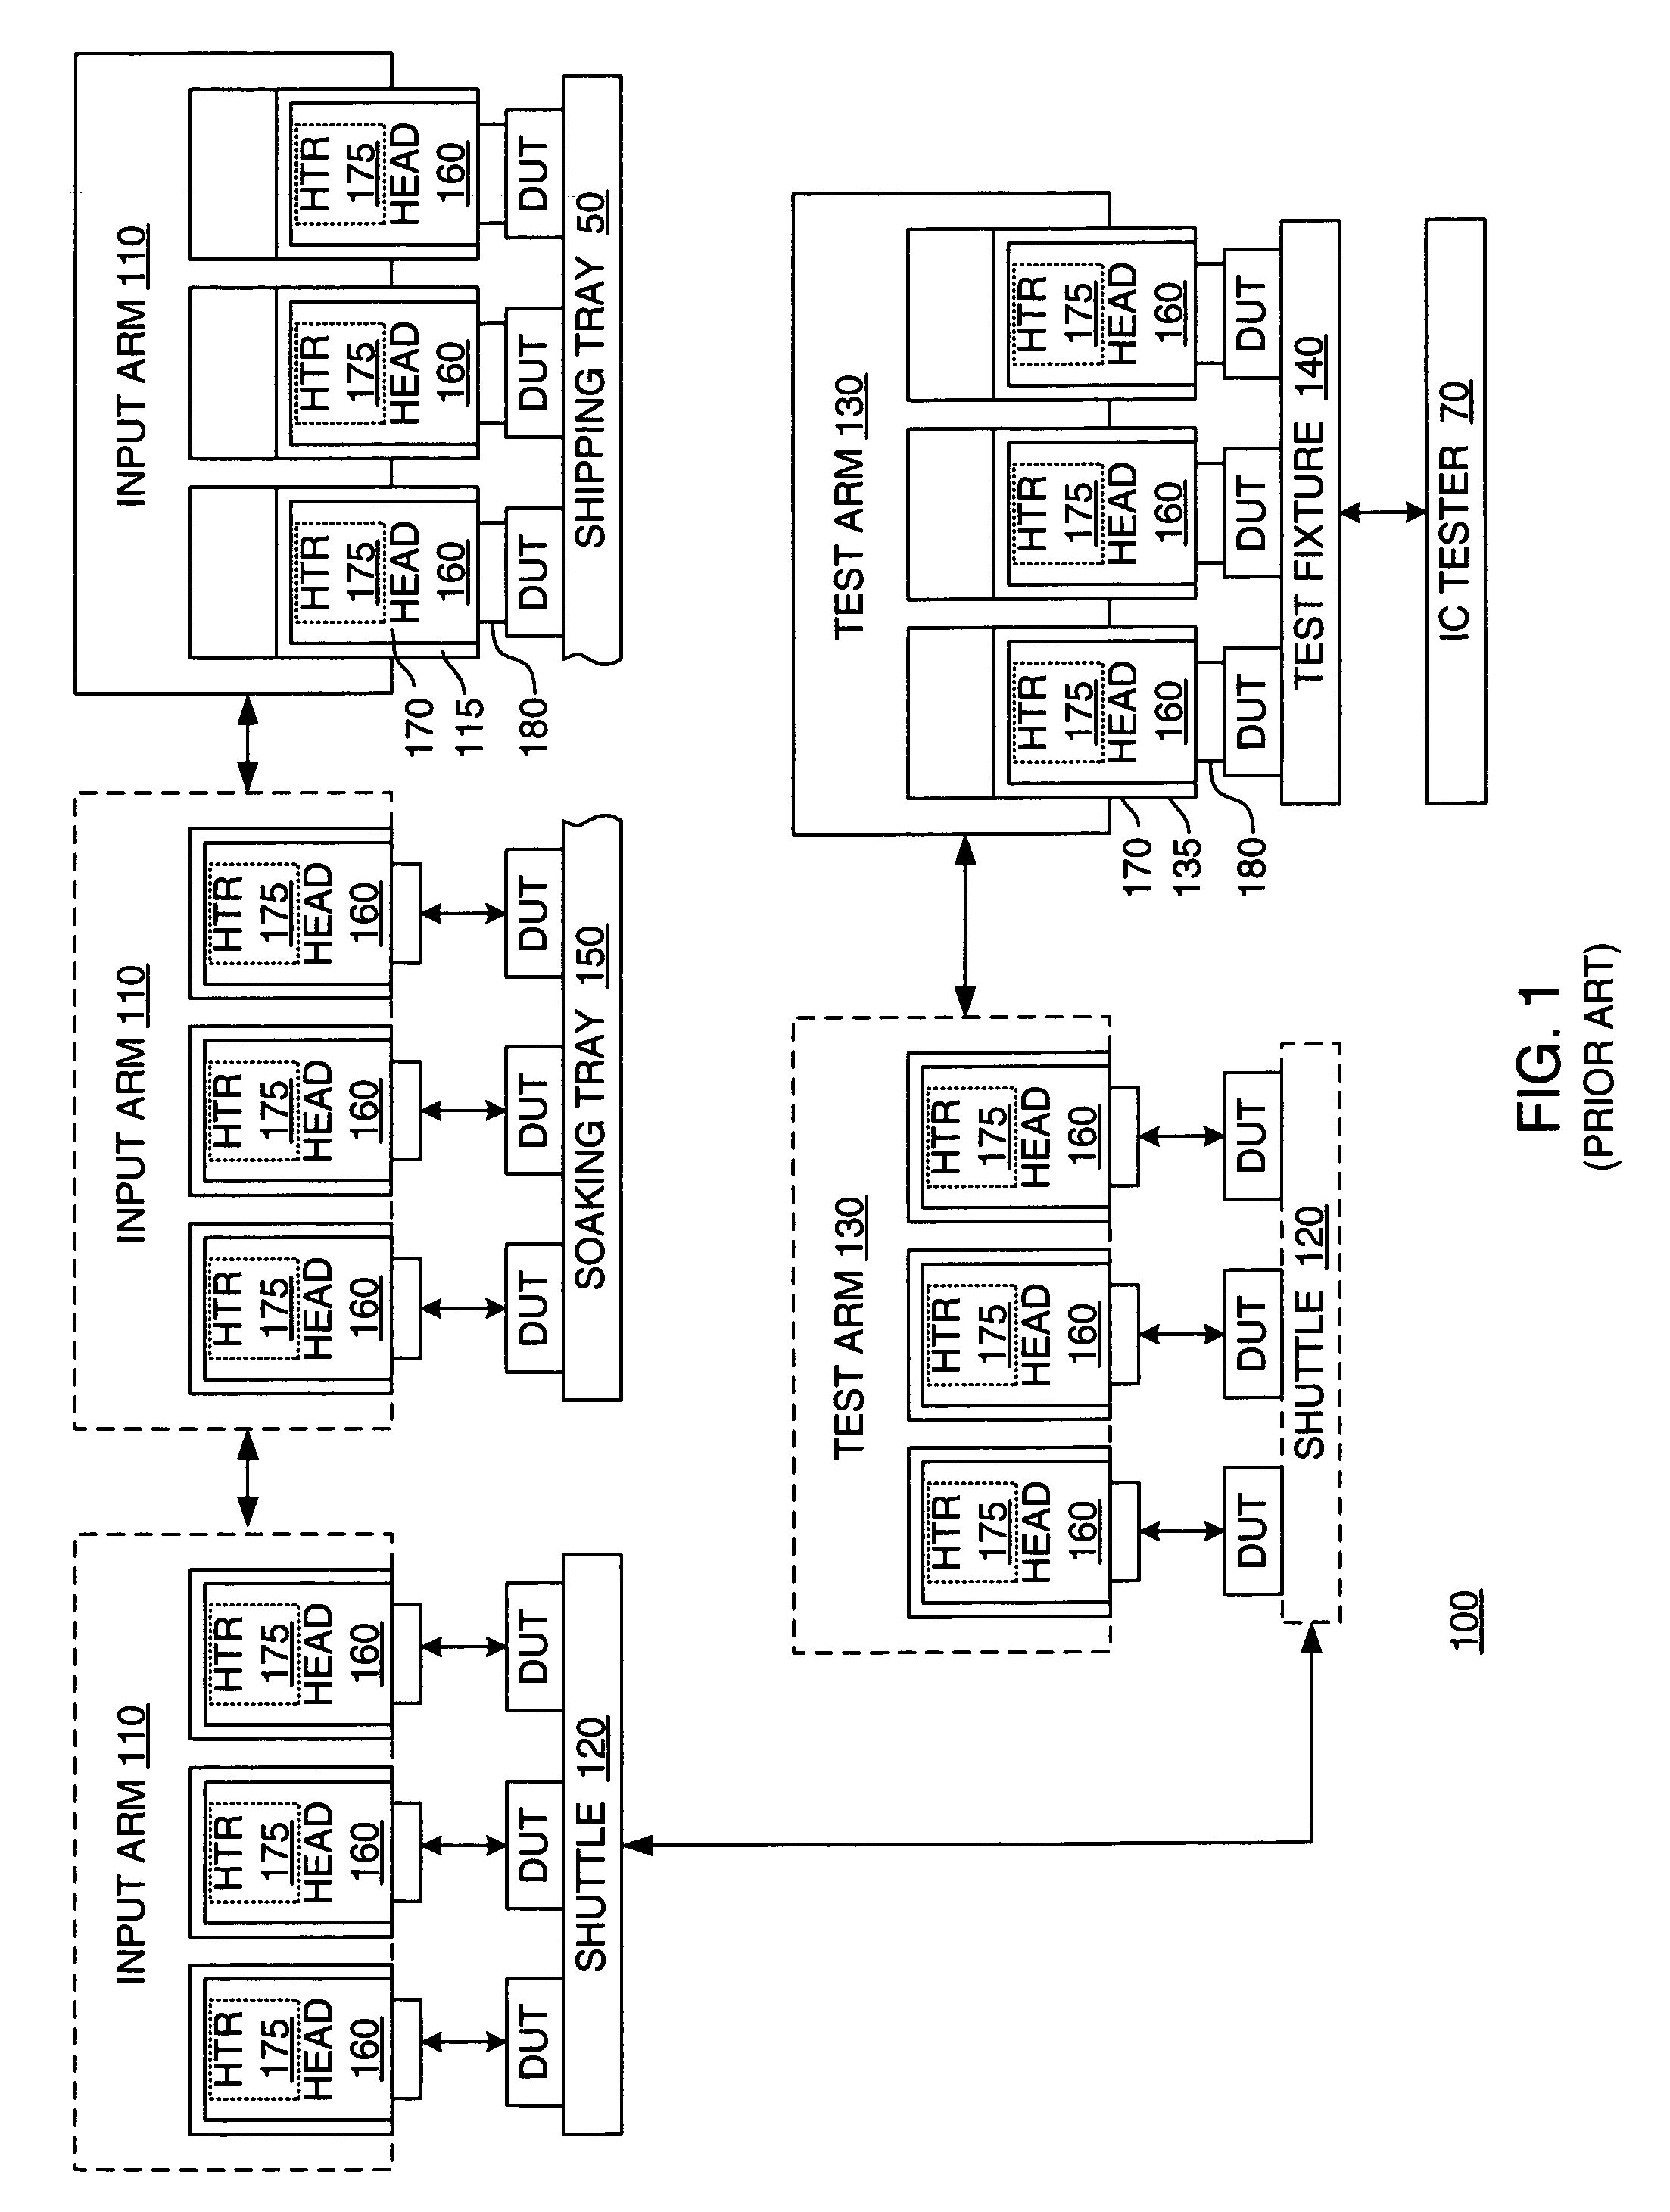 Method and apparatus for verifying temperature during integrated circuit thermal testing